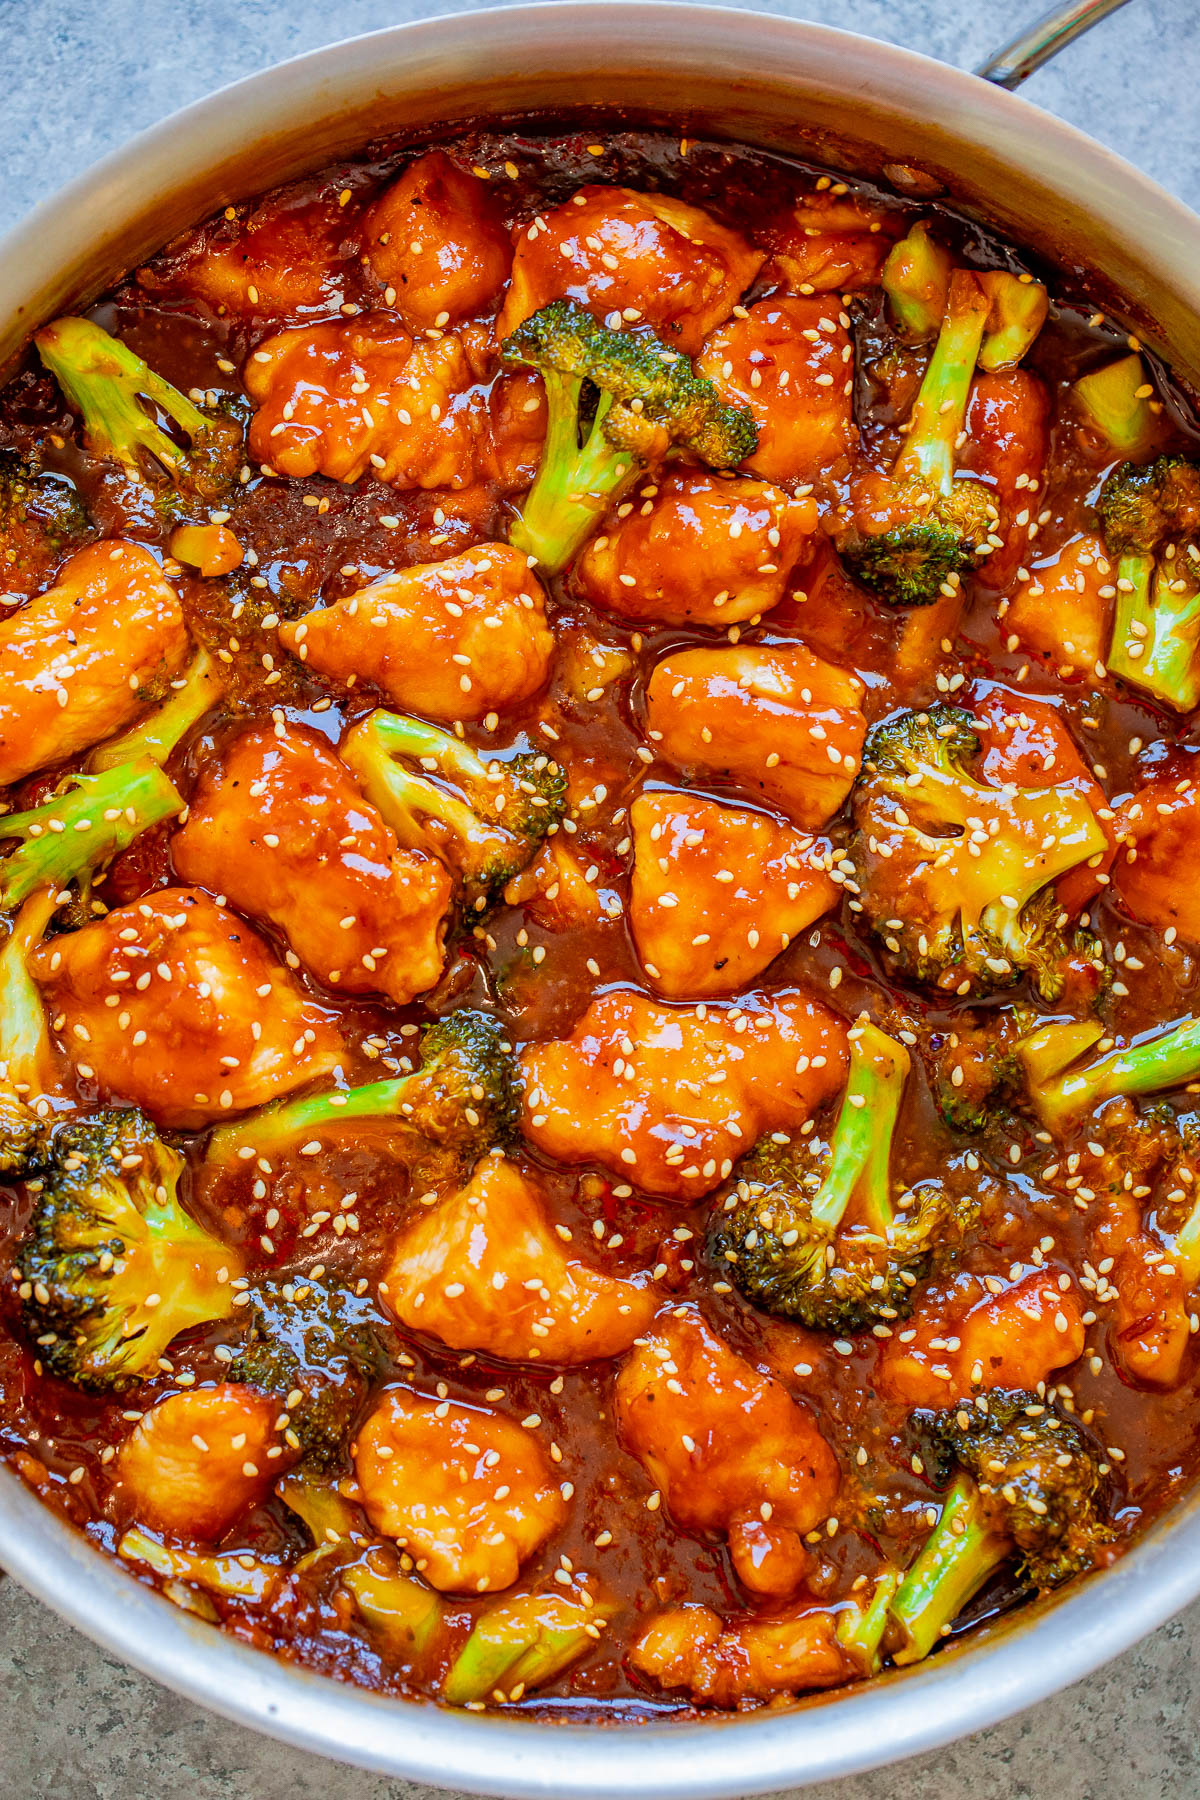 A dish of sesame chicken with broccoli in a thick, glossy sauce.